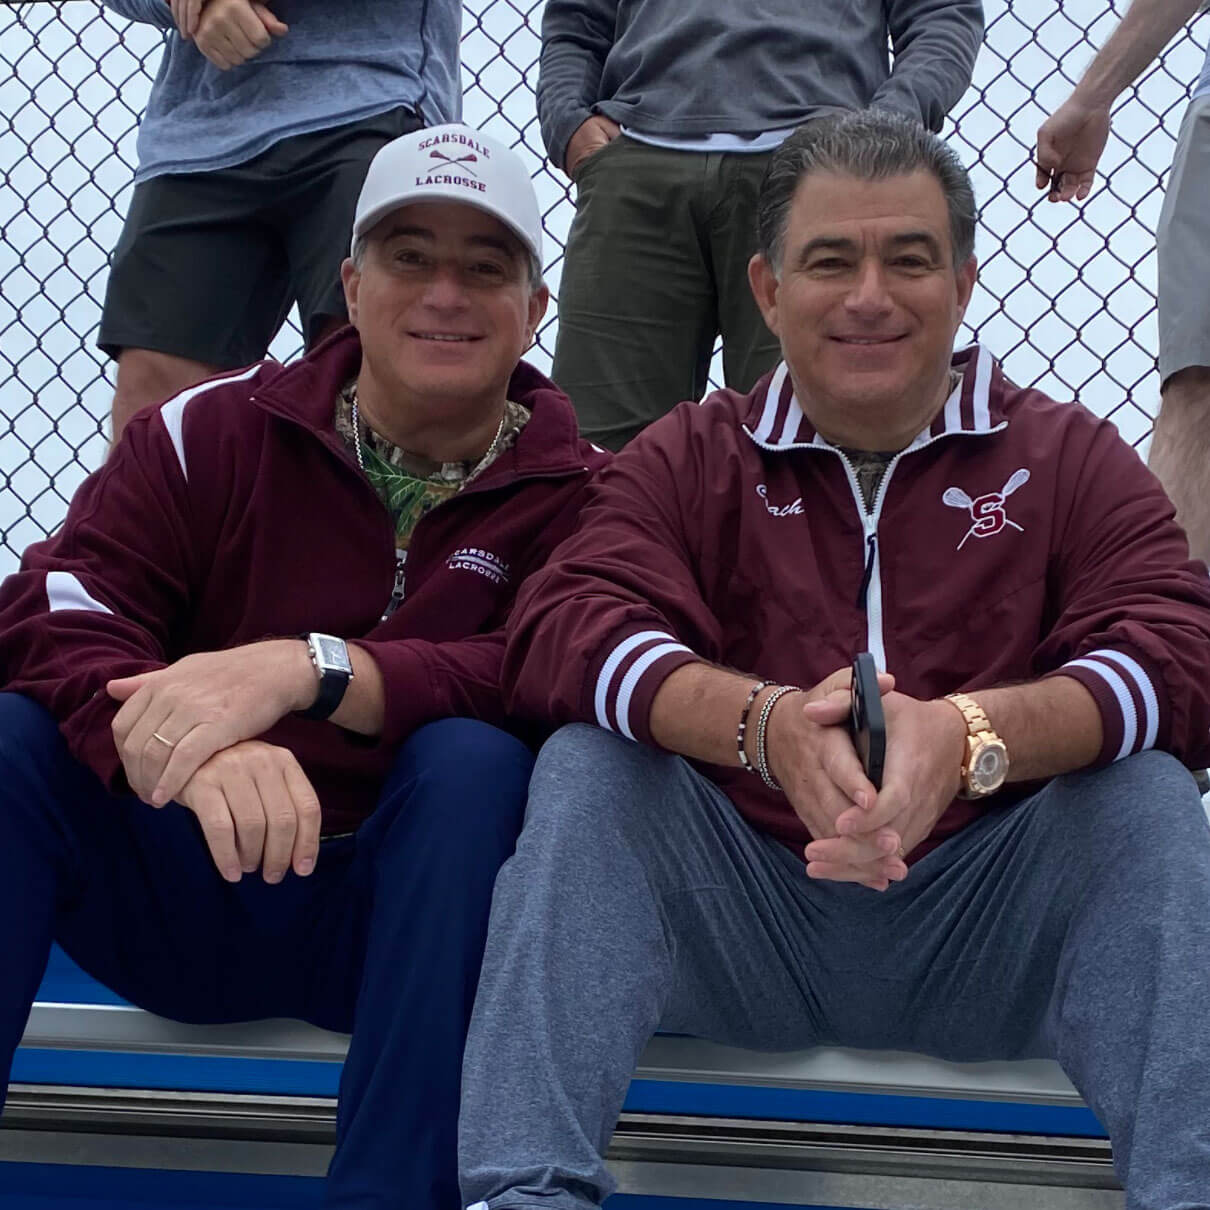 Brothers Neil and Jay Canell in the bleachers at a lacrosse game